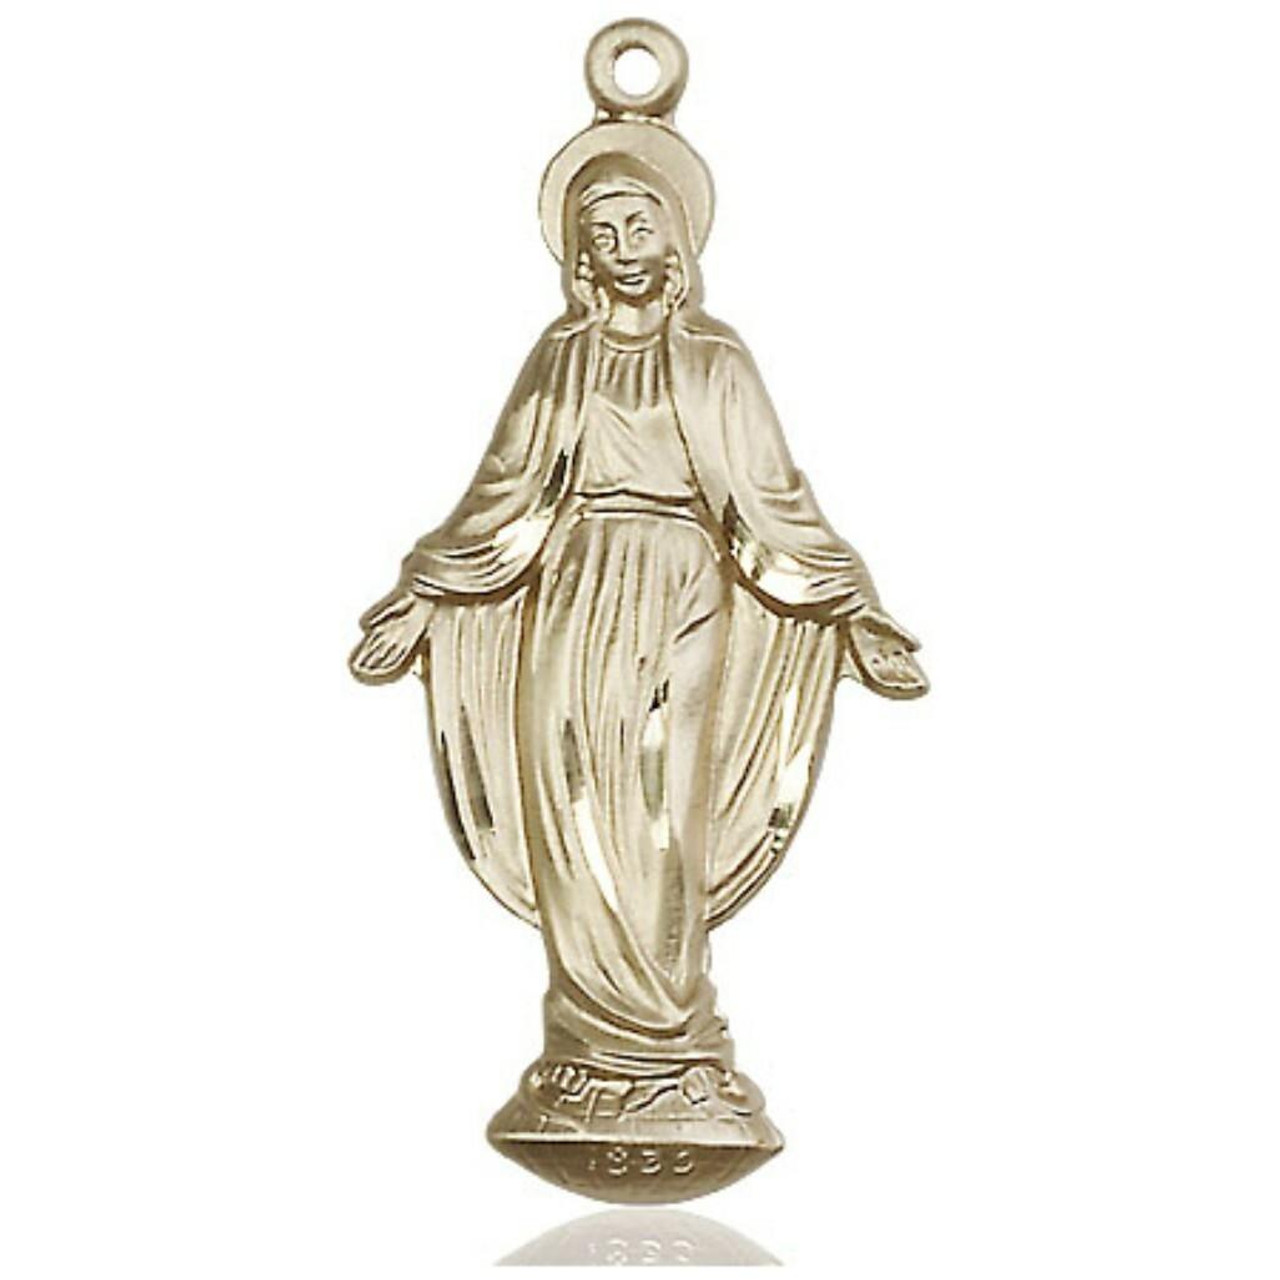 Extra Large Miraculous Medal - 14kt Gold 1 3/8 x 1 1/4 Round Pendant  (0203M)